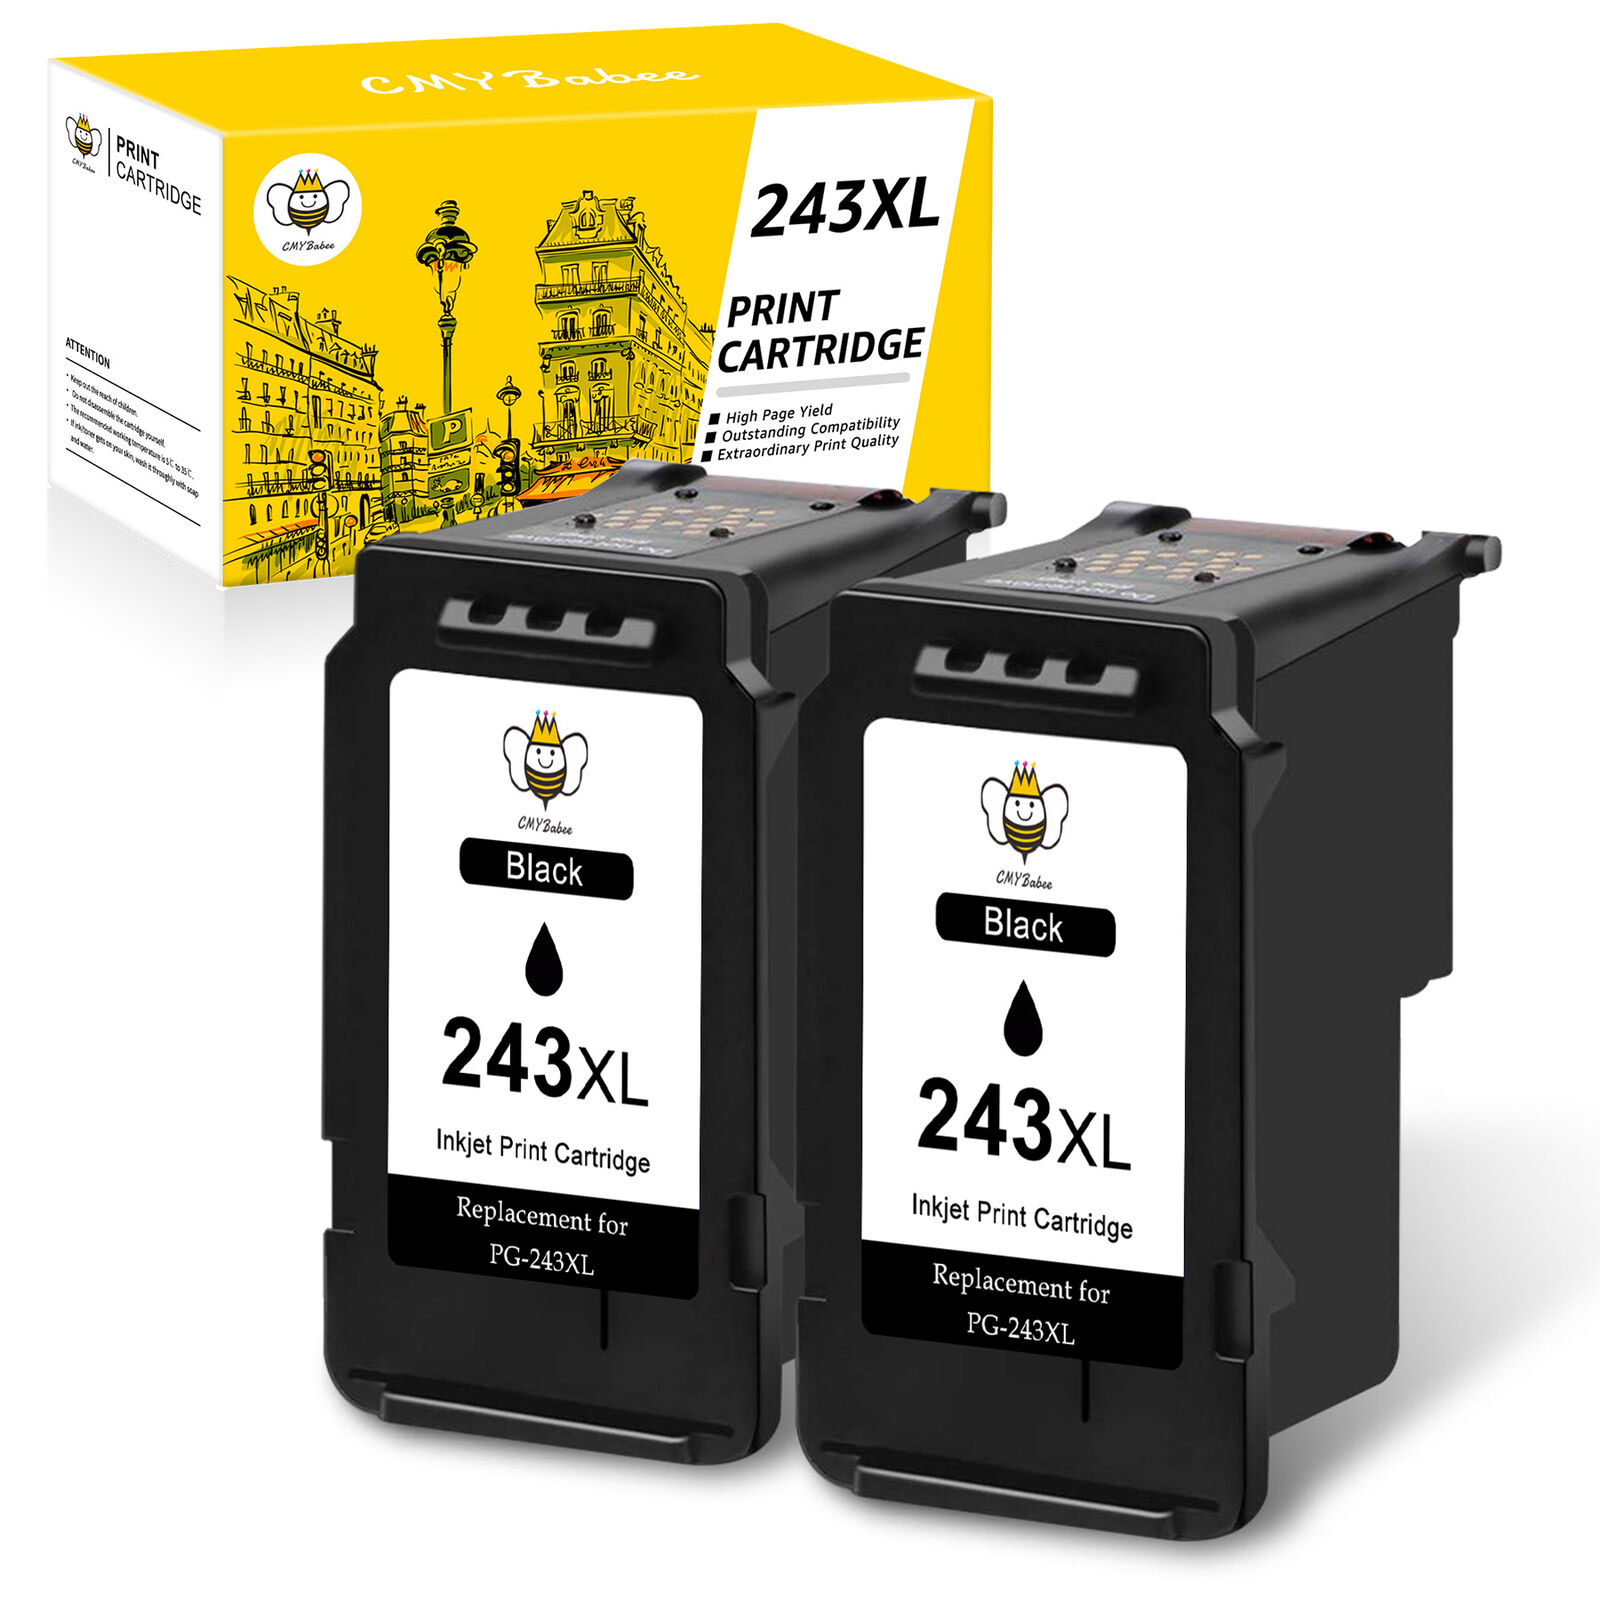 2x PG-243XL PG-243 High Yield Black Ink Cartridge for Canon PIXMA Printers